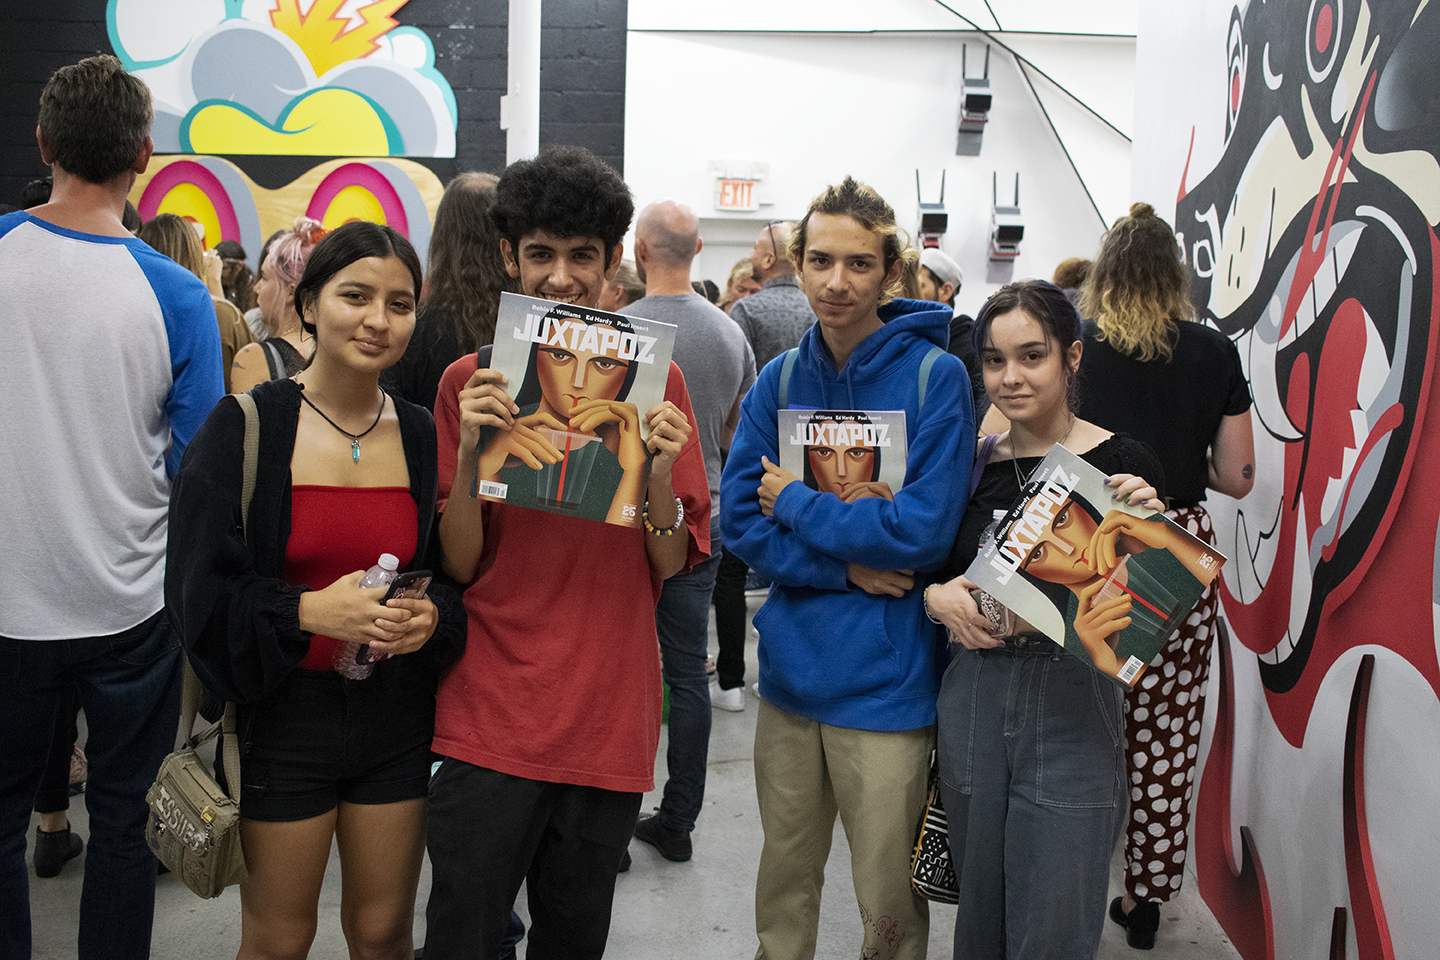 Some young fans of the mag